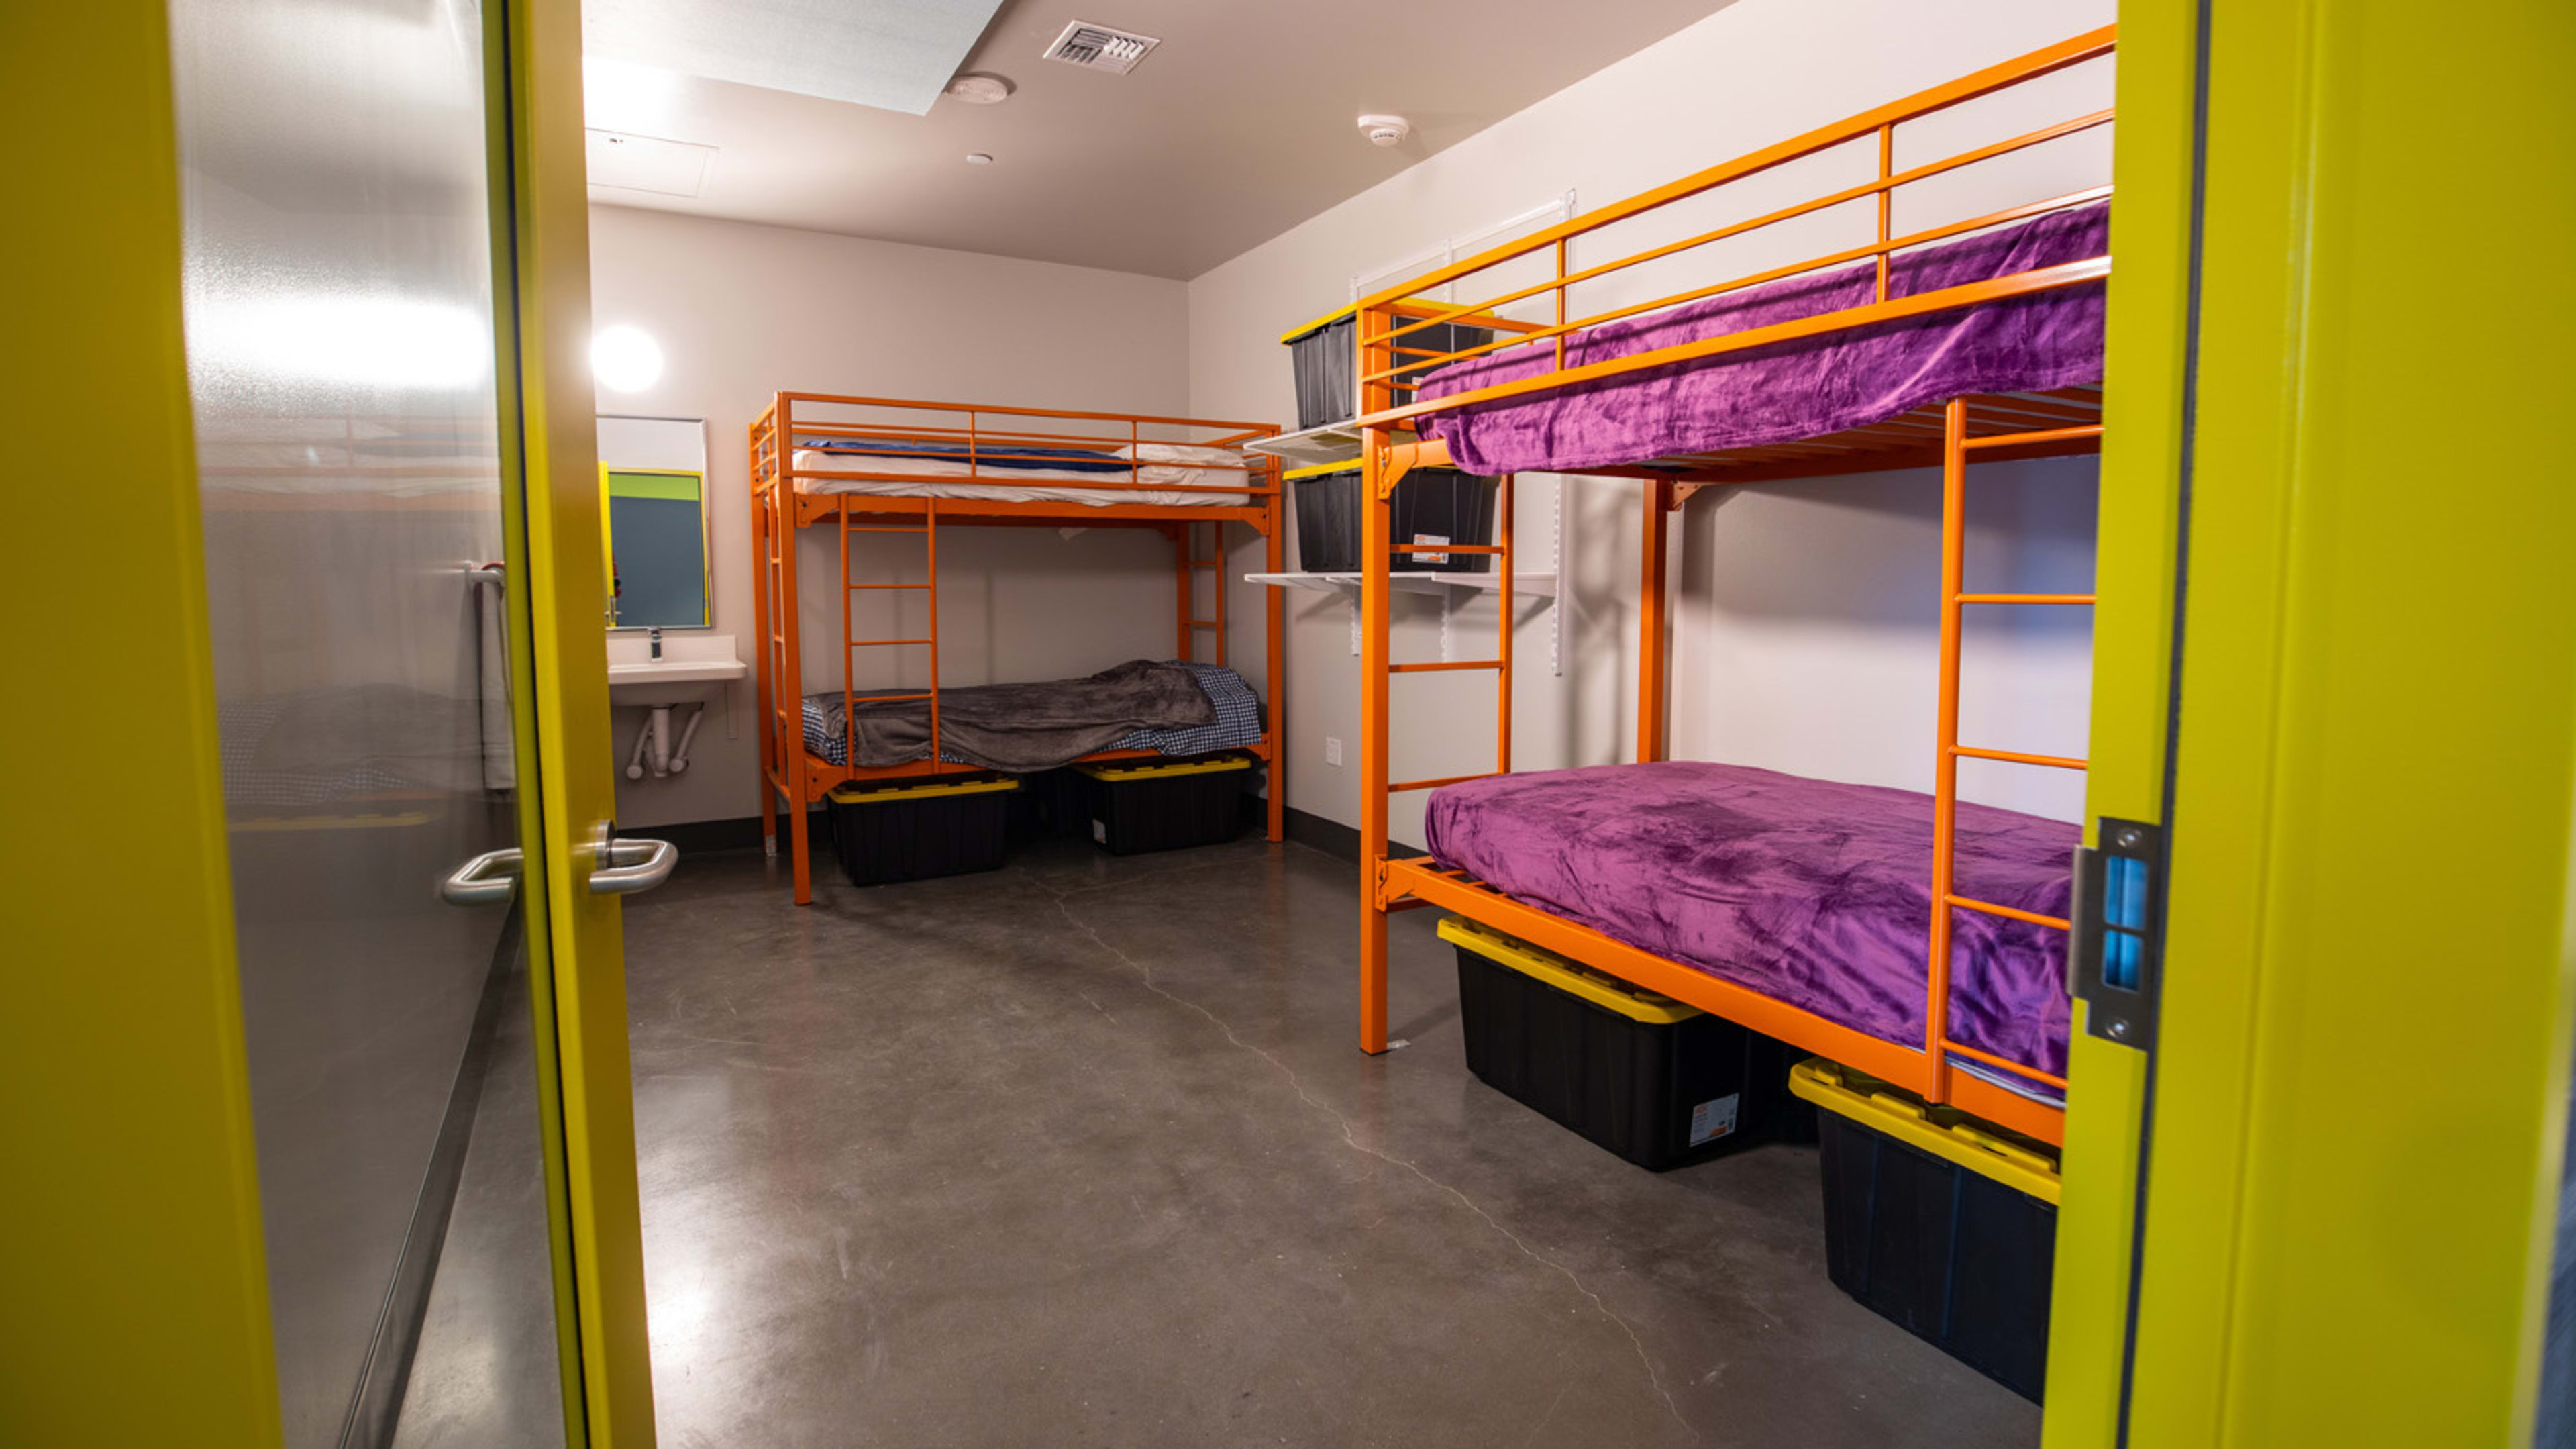 Inside the new homeless shelter at Amazon’s headquarters